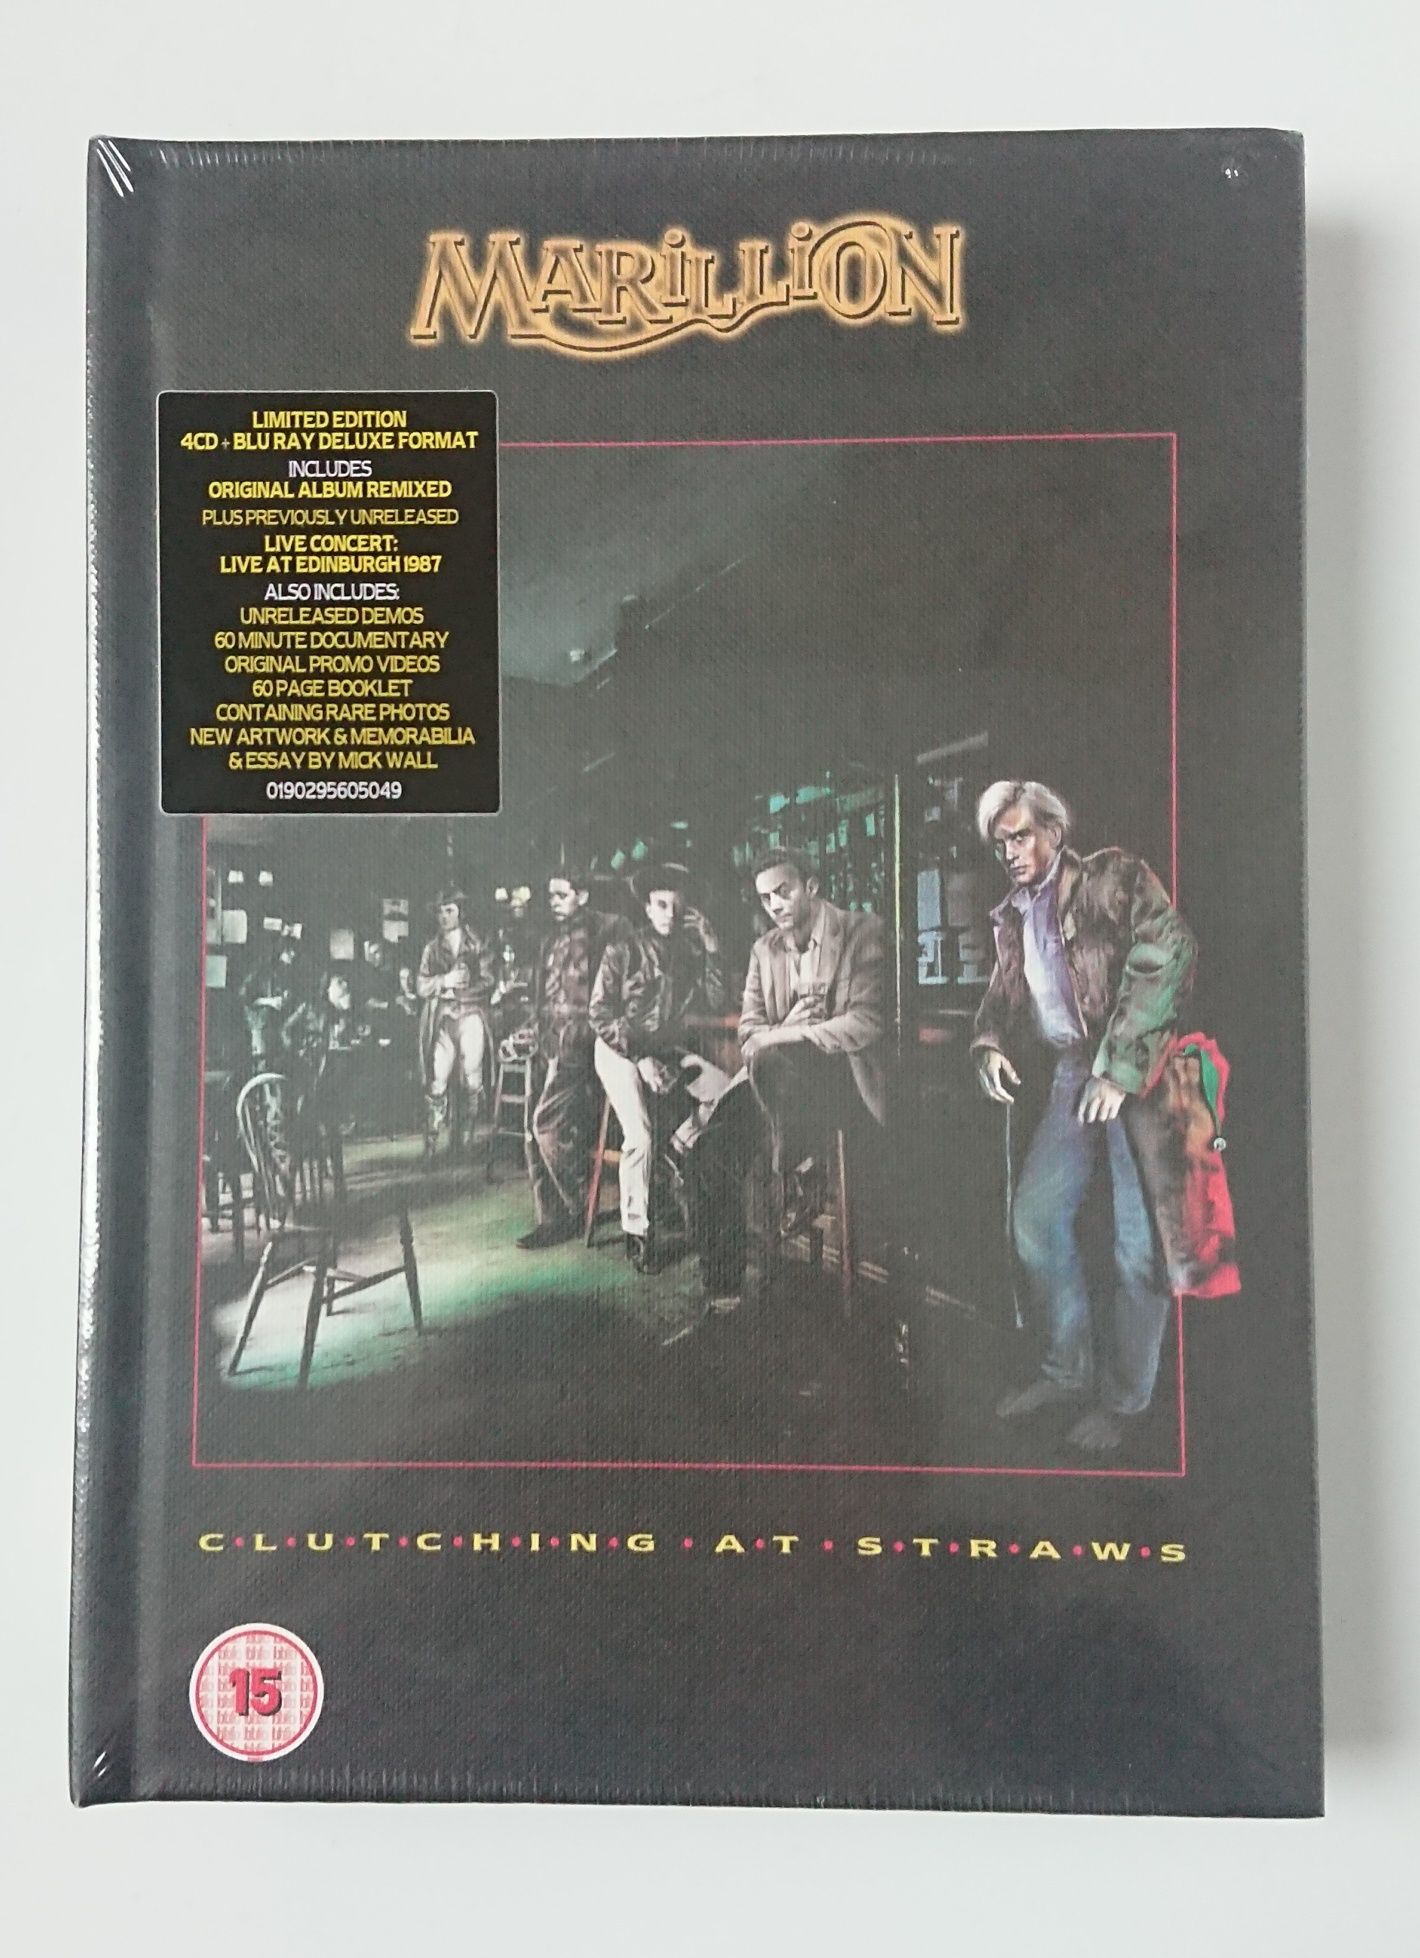 Marillion Clutching At Straws deluxe 4cd blu ray